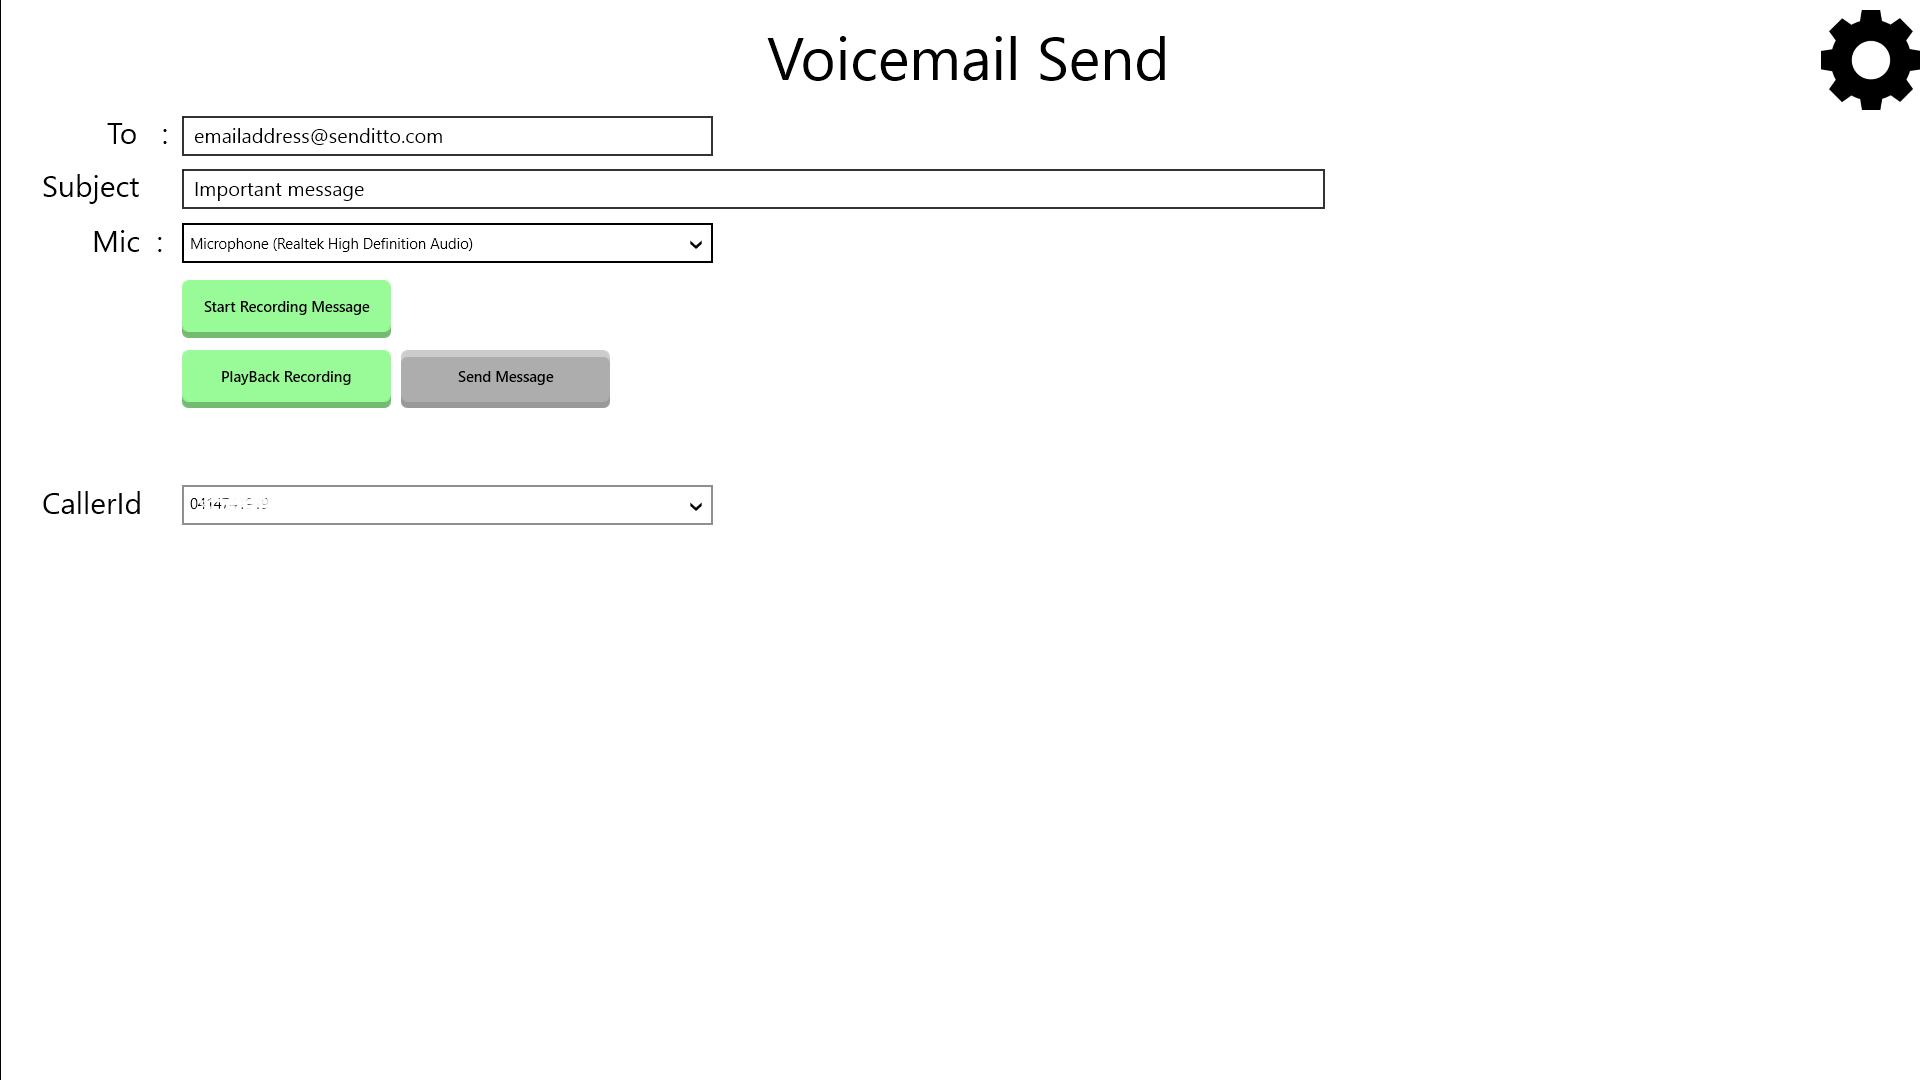 Record Voice Mail